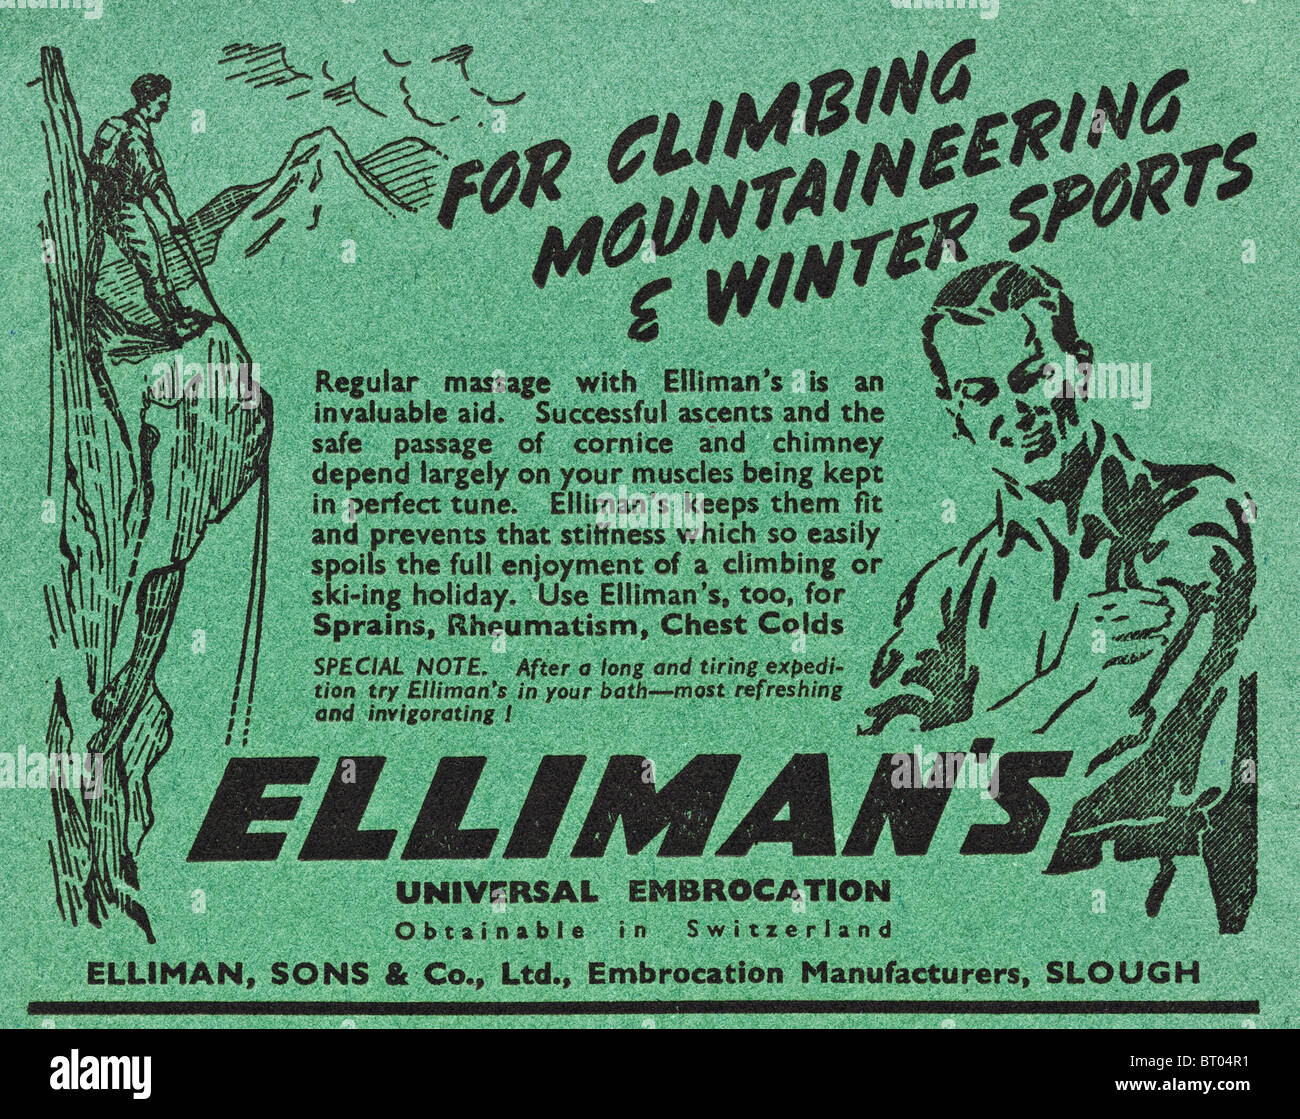 Advert for Elliman's embrocation in the magazine Mountaineering published by The British Mountaineering Council circa 1948 Stock Photo